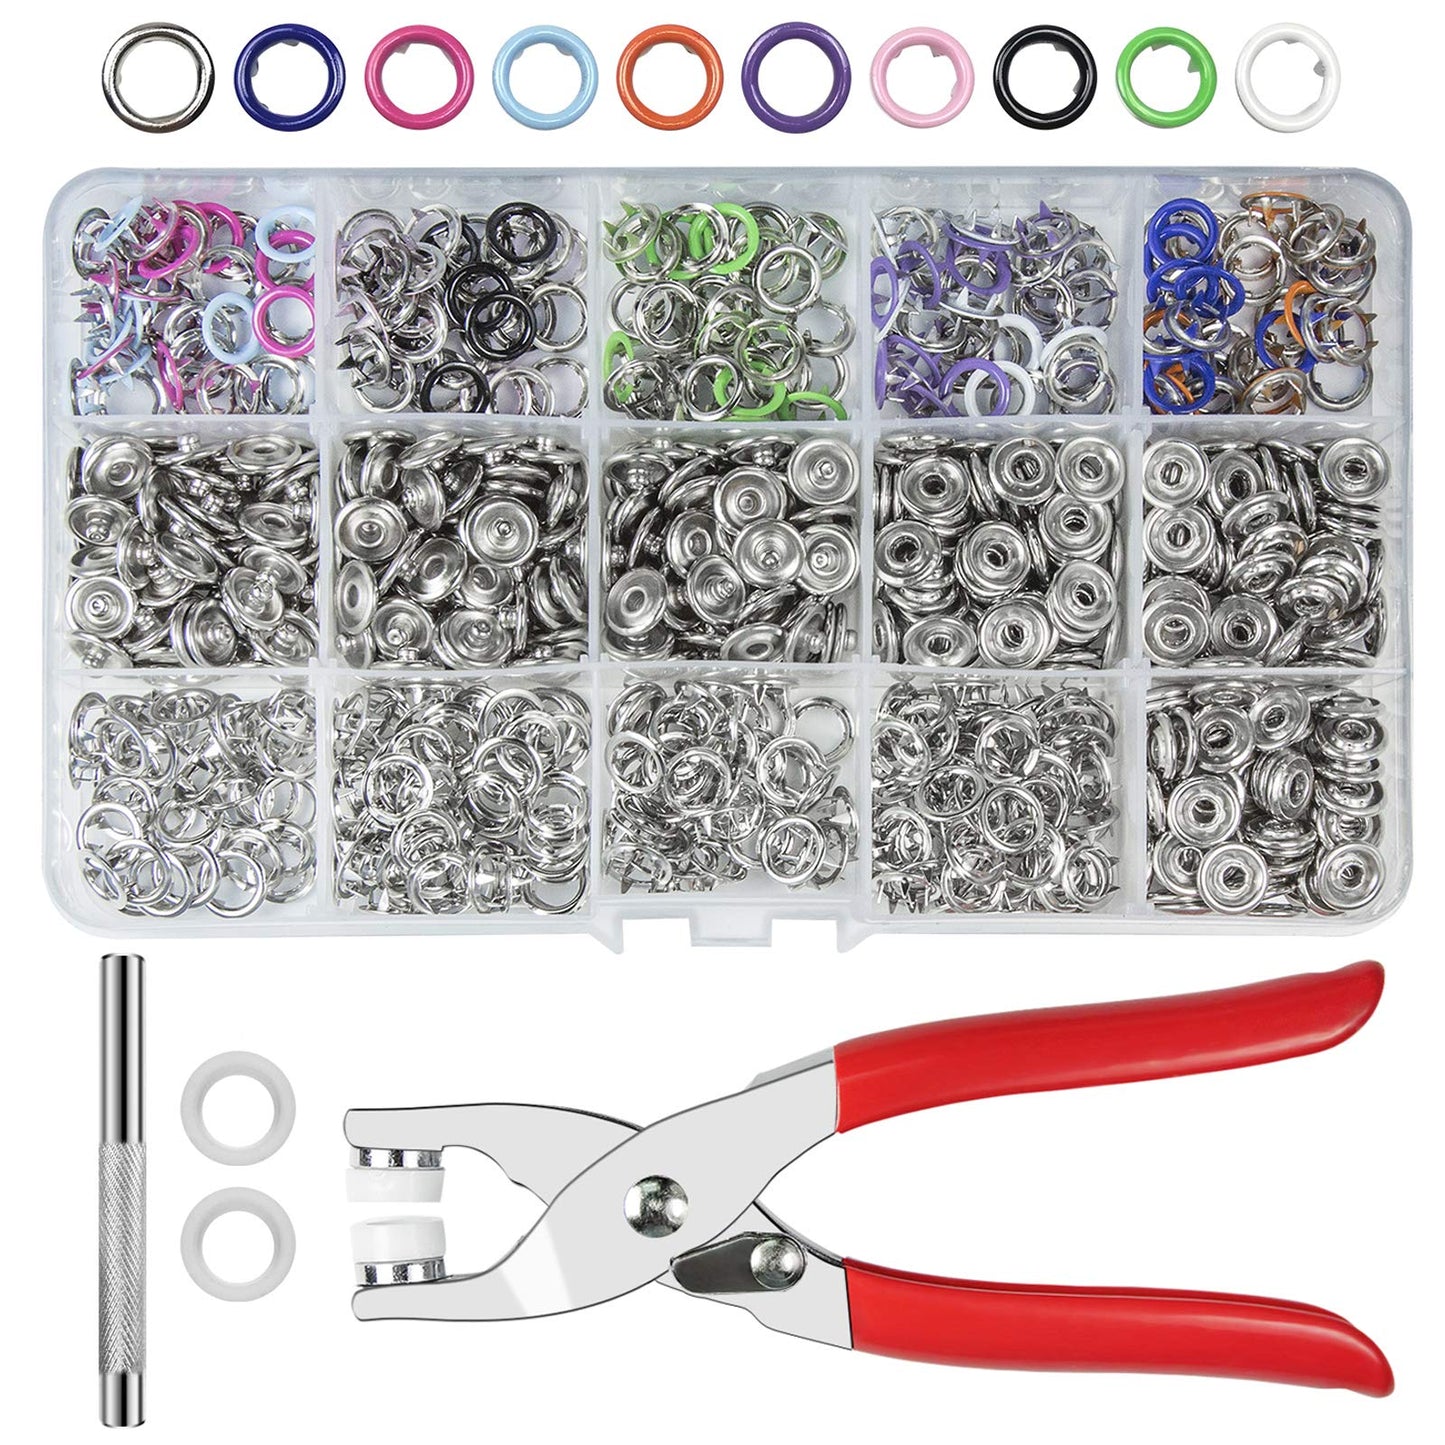 CHEPULA Craftsmanship DIY 200 Sets Metal Snaps Buttons with Fastener Pliers Press Tool Kit for Sewing and Crafting (10 Colors,9.5mm) (Hollow)